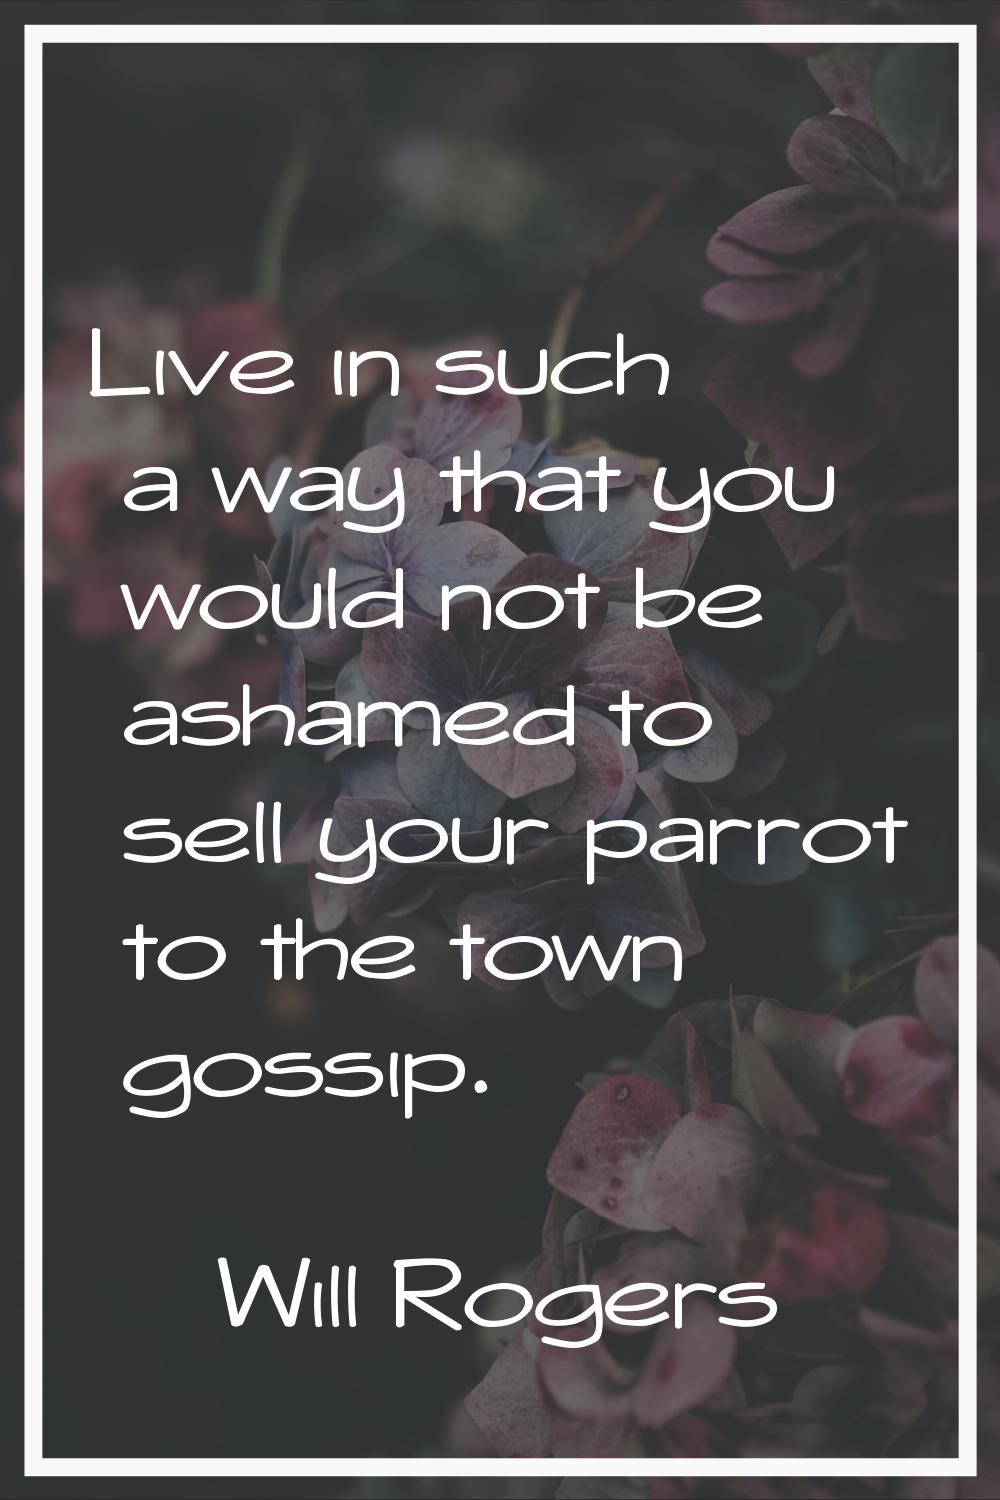 Live in such a way that you would not be ashamed to sell your parrot to the town gossip.